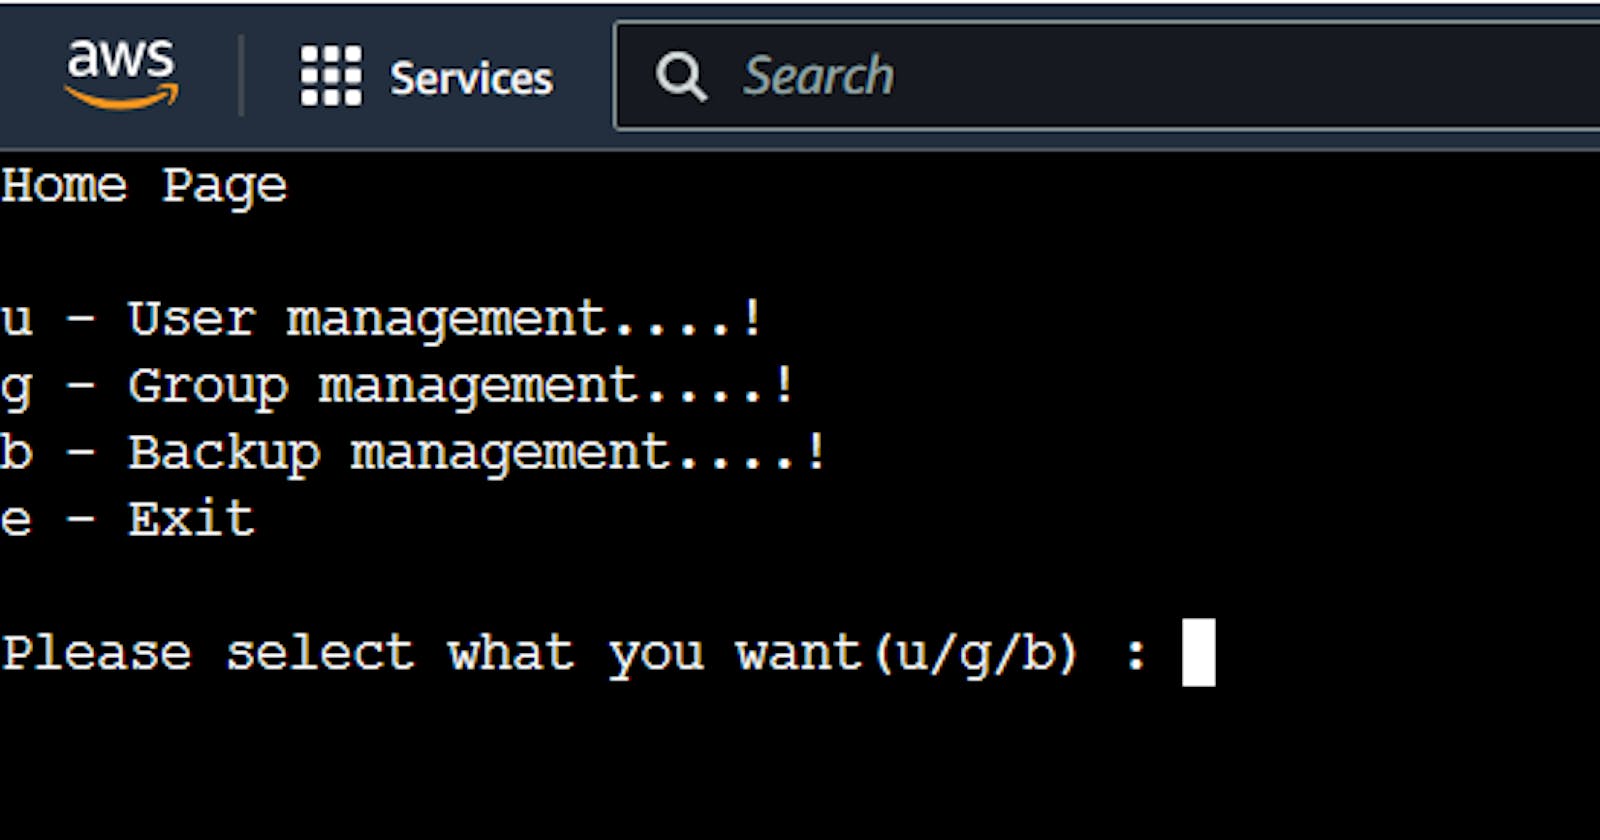 Project 1 - Shell Script for User Management and Backup in Linux